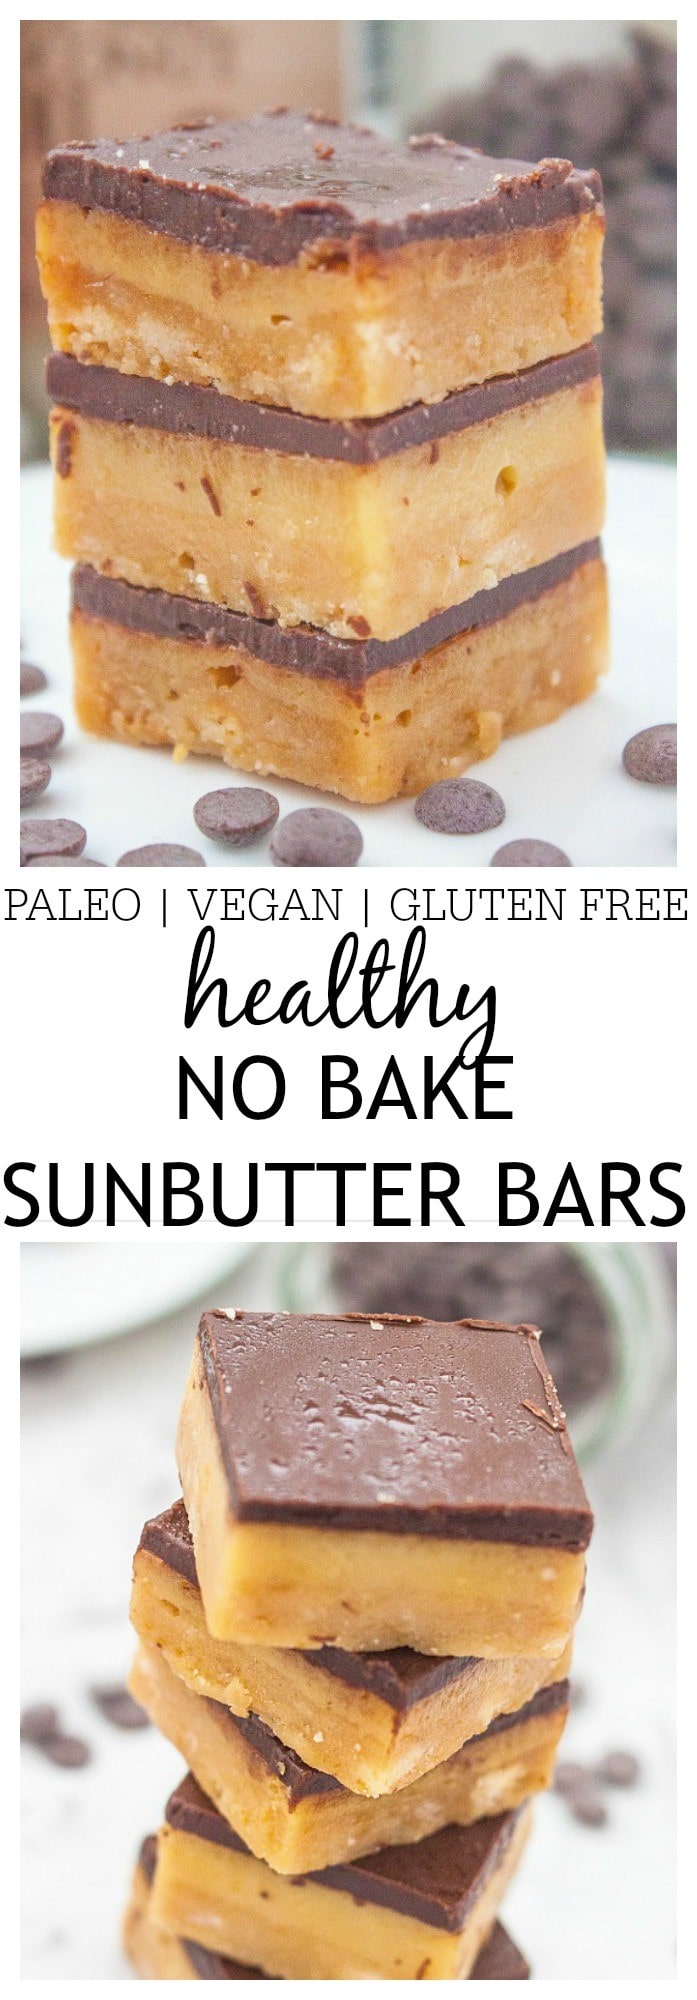 Healthy No Bake SunButter Bars which are a quick and easy dessert or snack which takes no time and can be completely allergen friendly! {vegan, gluten free, paleo recipe}- thebigmansworld.com